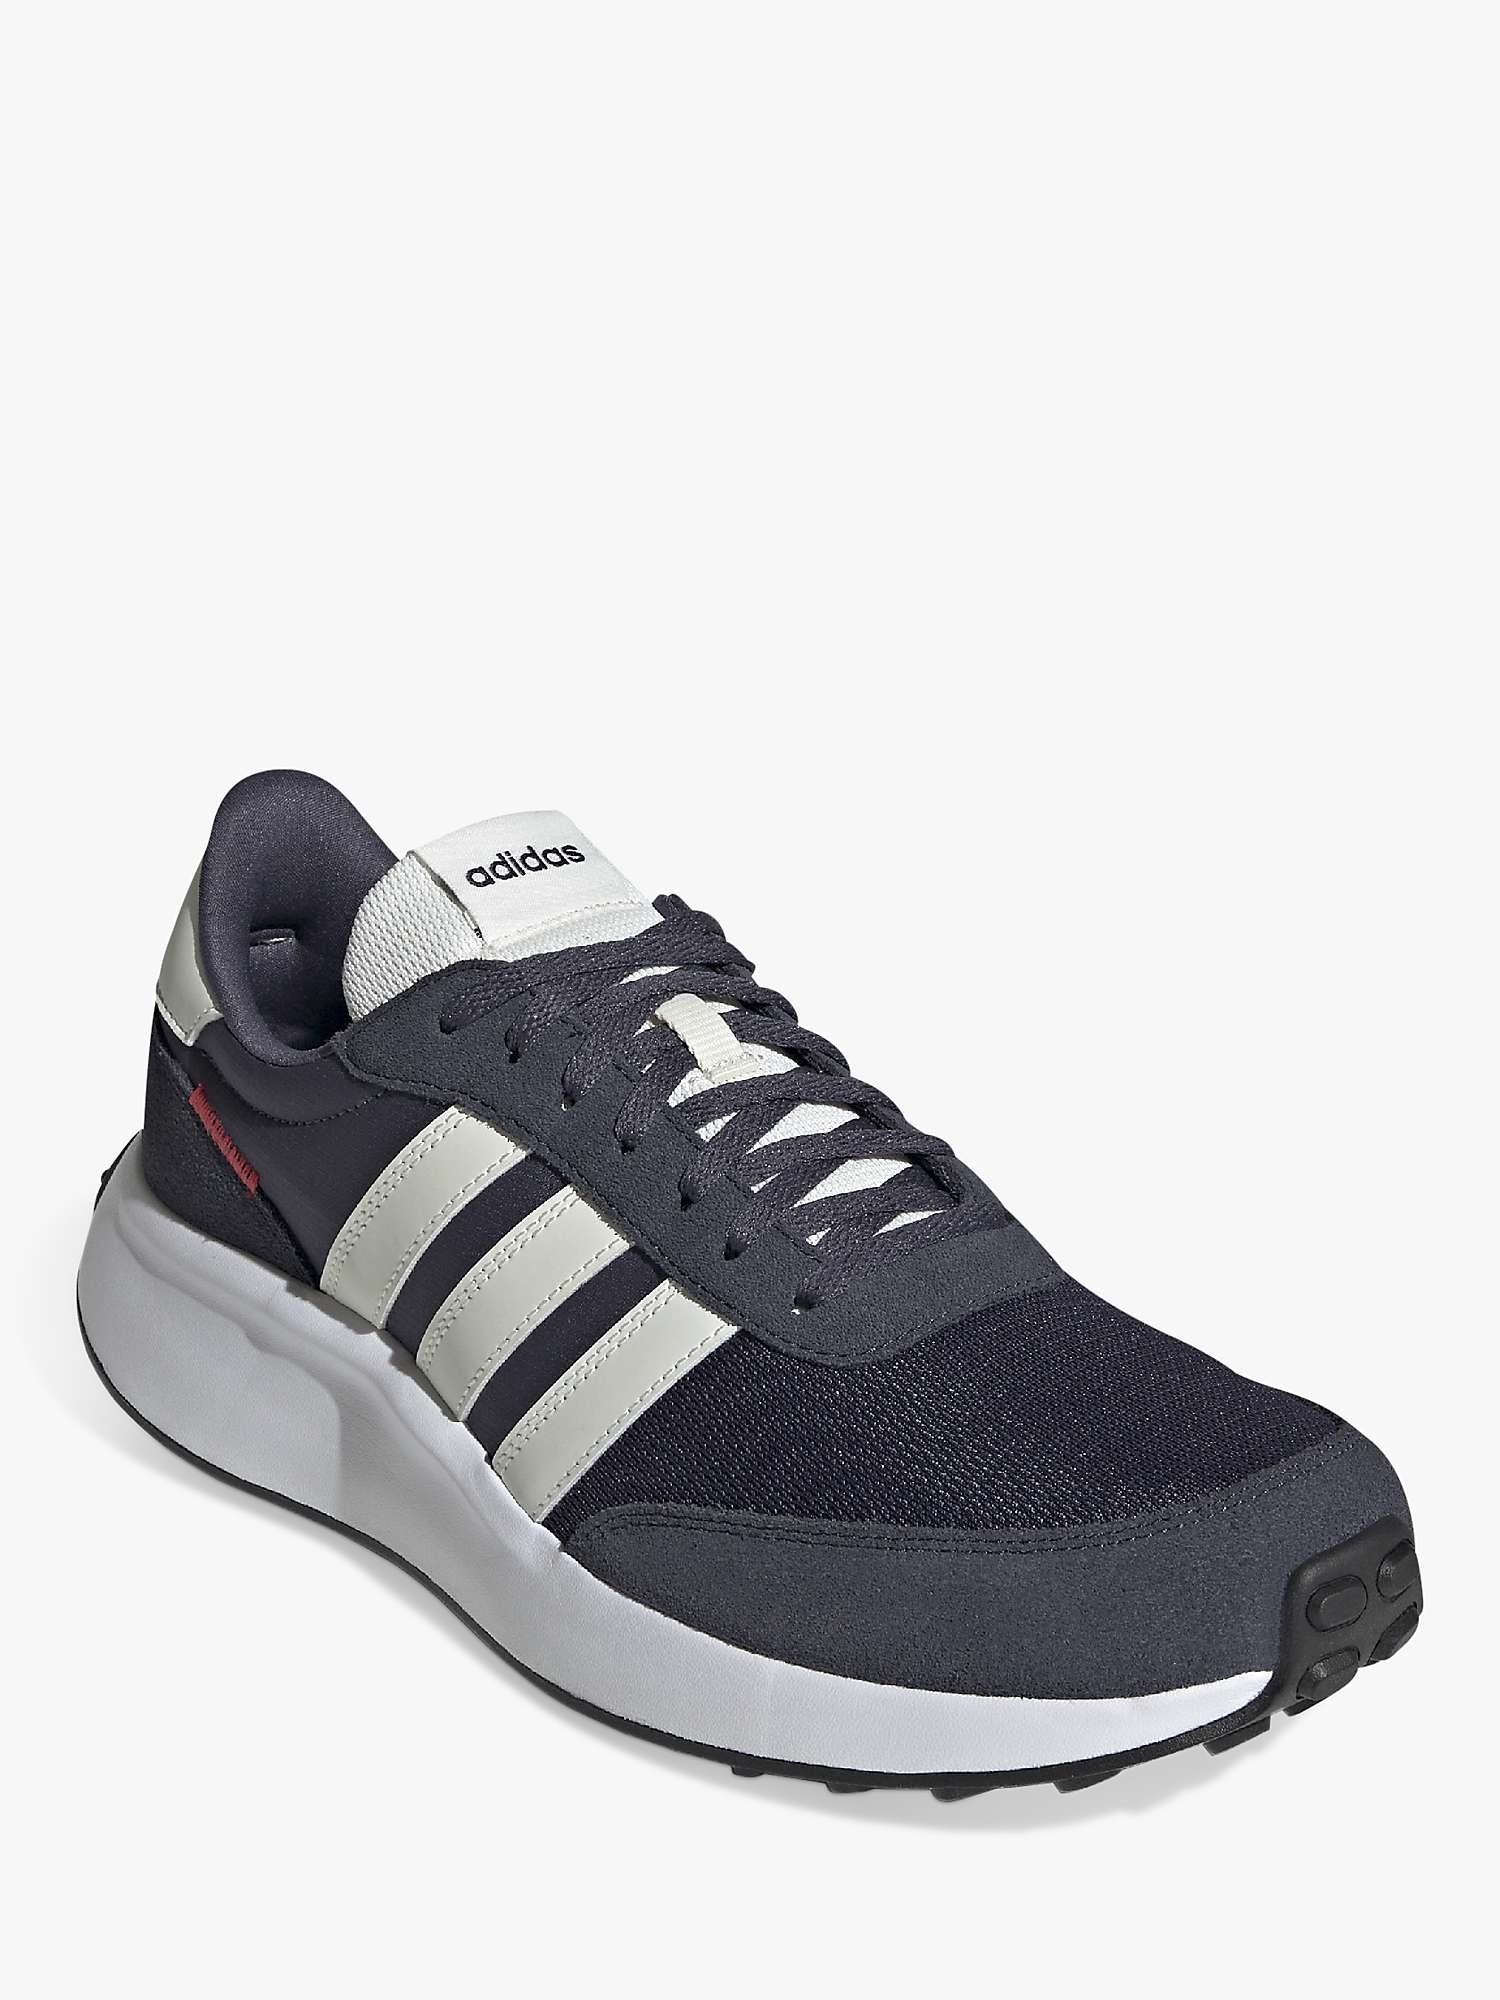 Buy adidas Run 70s Lifestyle Running Shoes Online at johnlewis.com